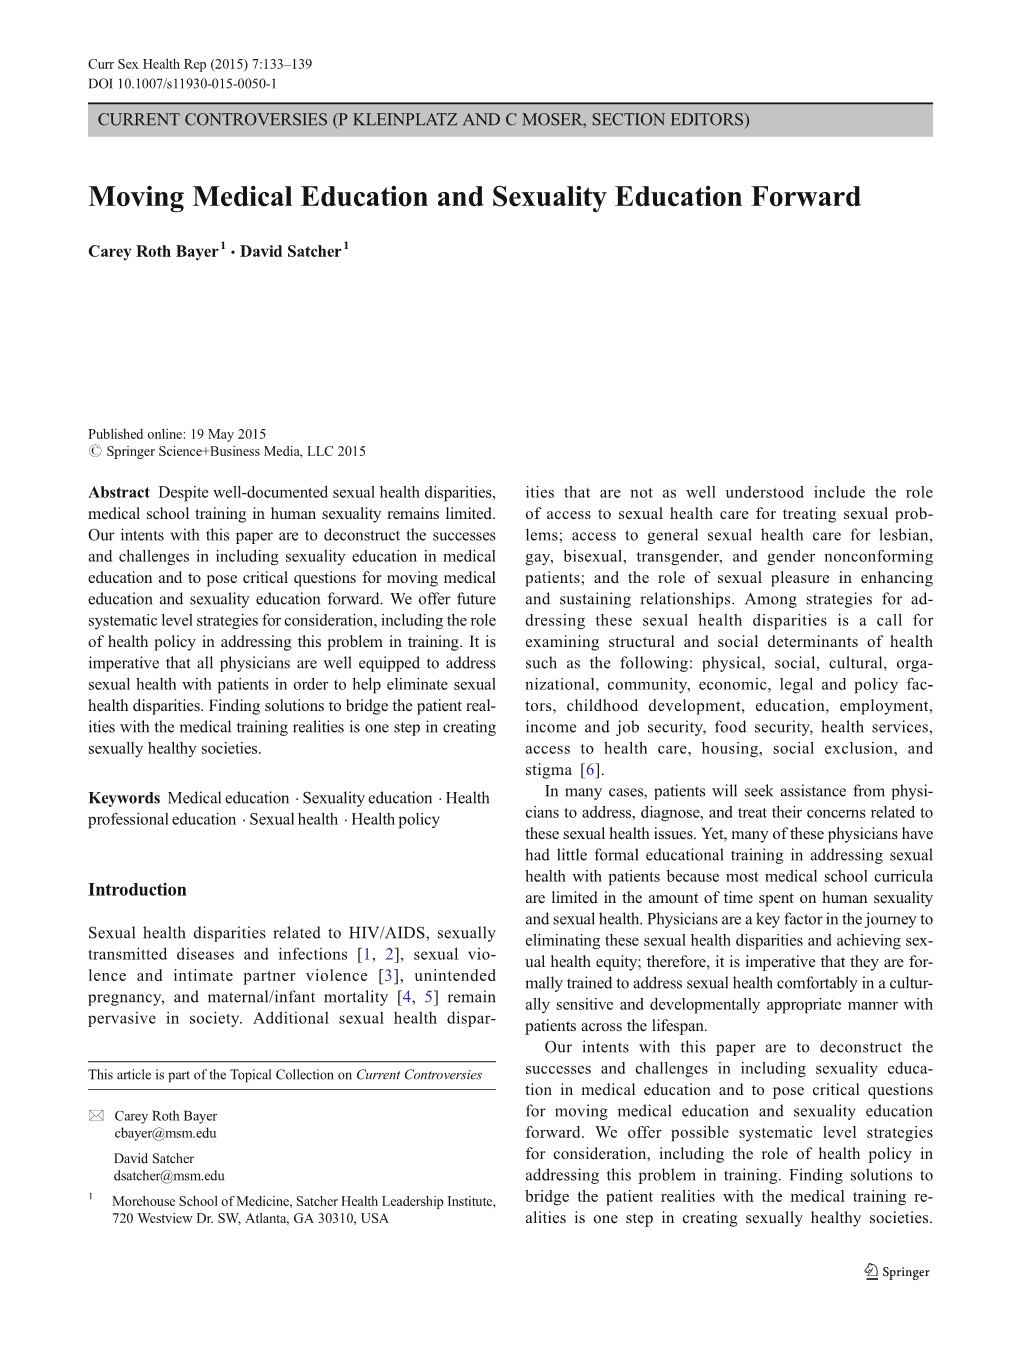 Moving Medical Education and Sexuality Education Forward